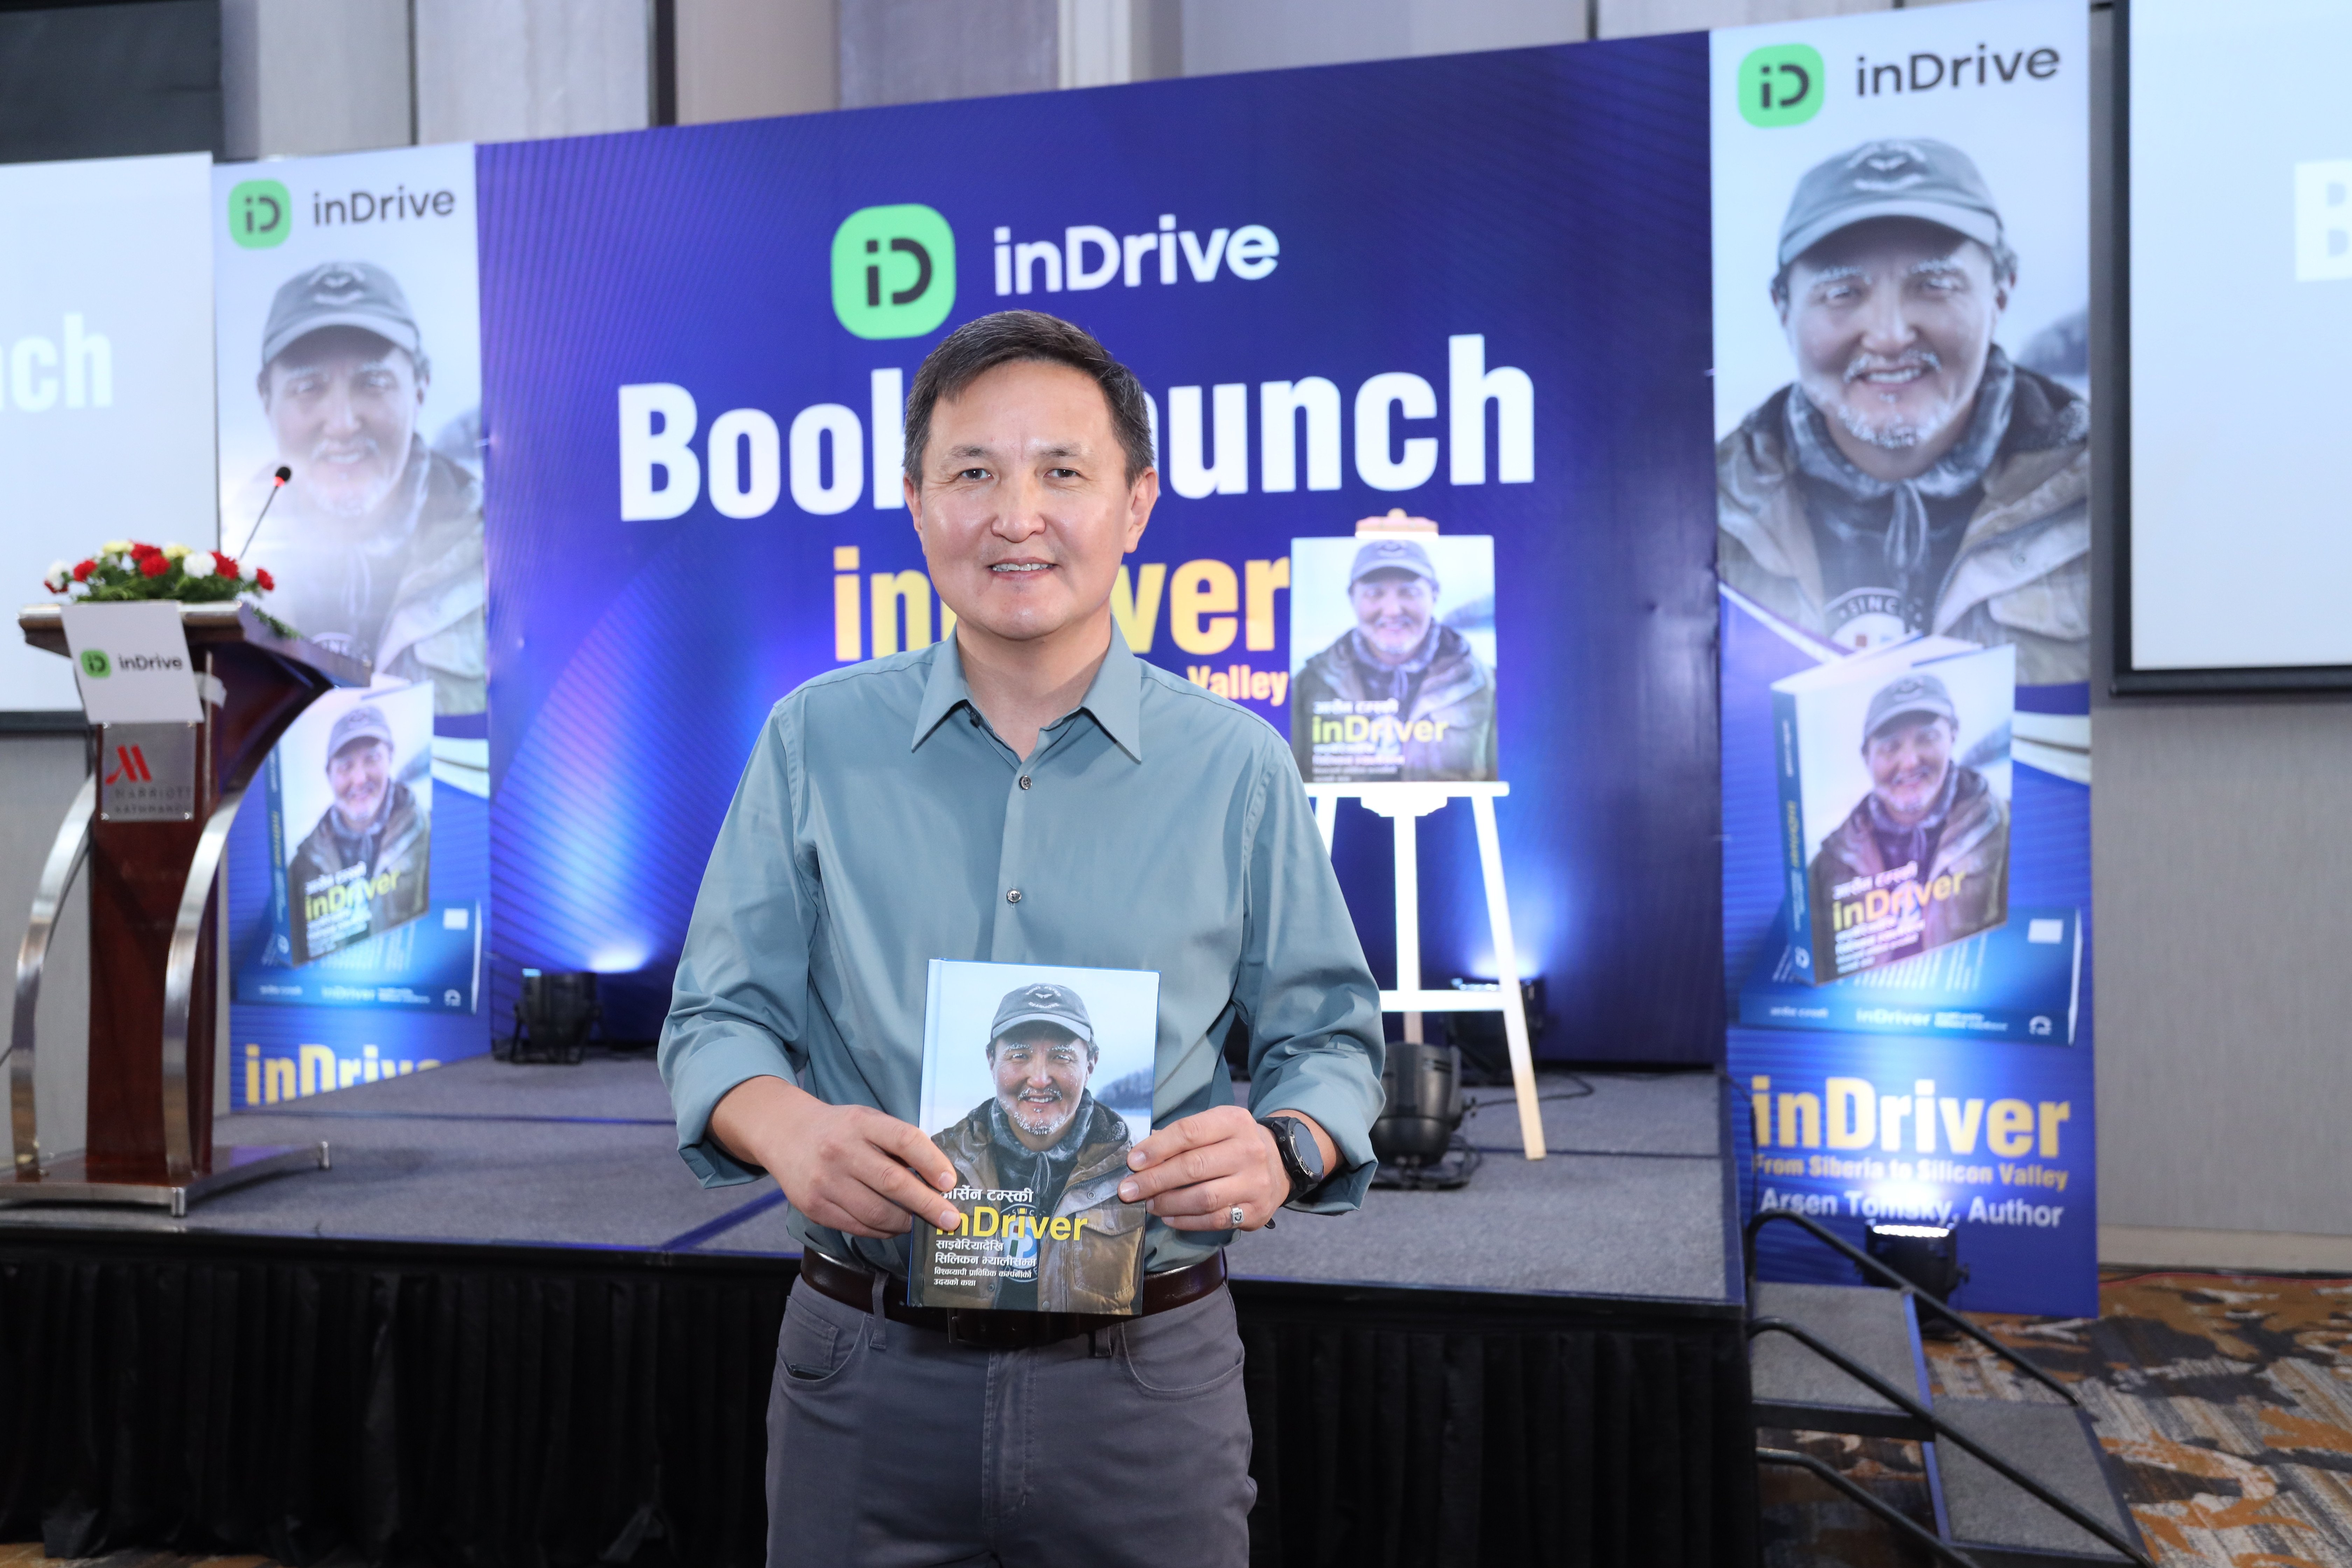 Arsen Tomsky’s book “inDriver: From Siberia to Silicon Valley” launched in Nepal